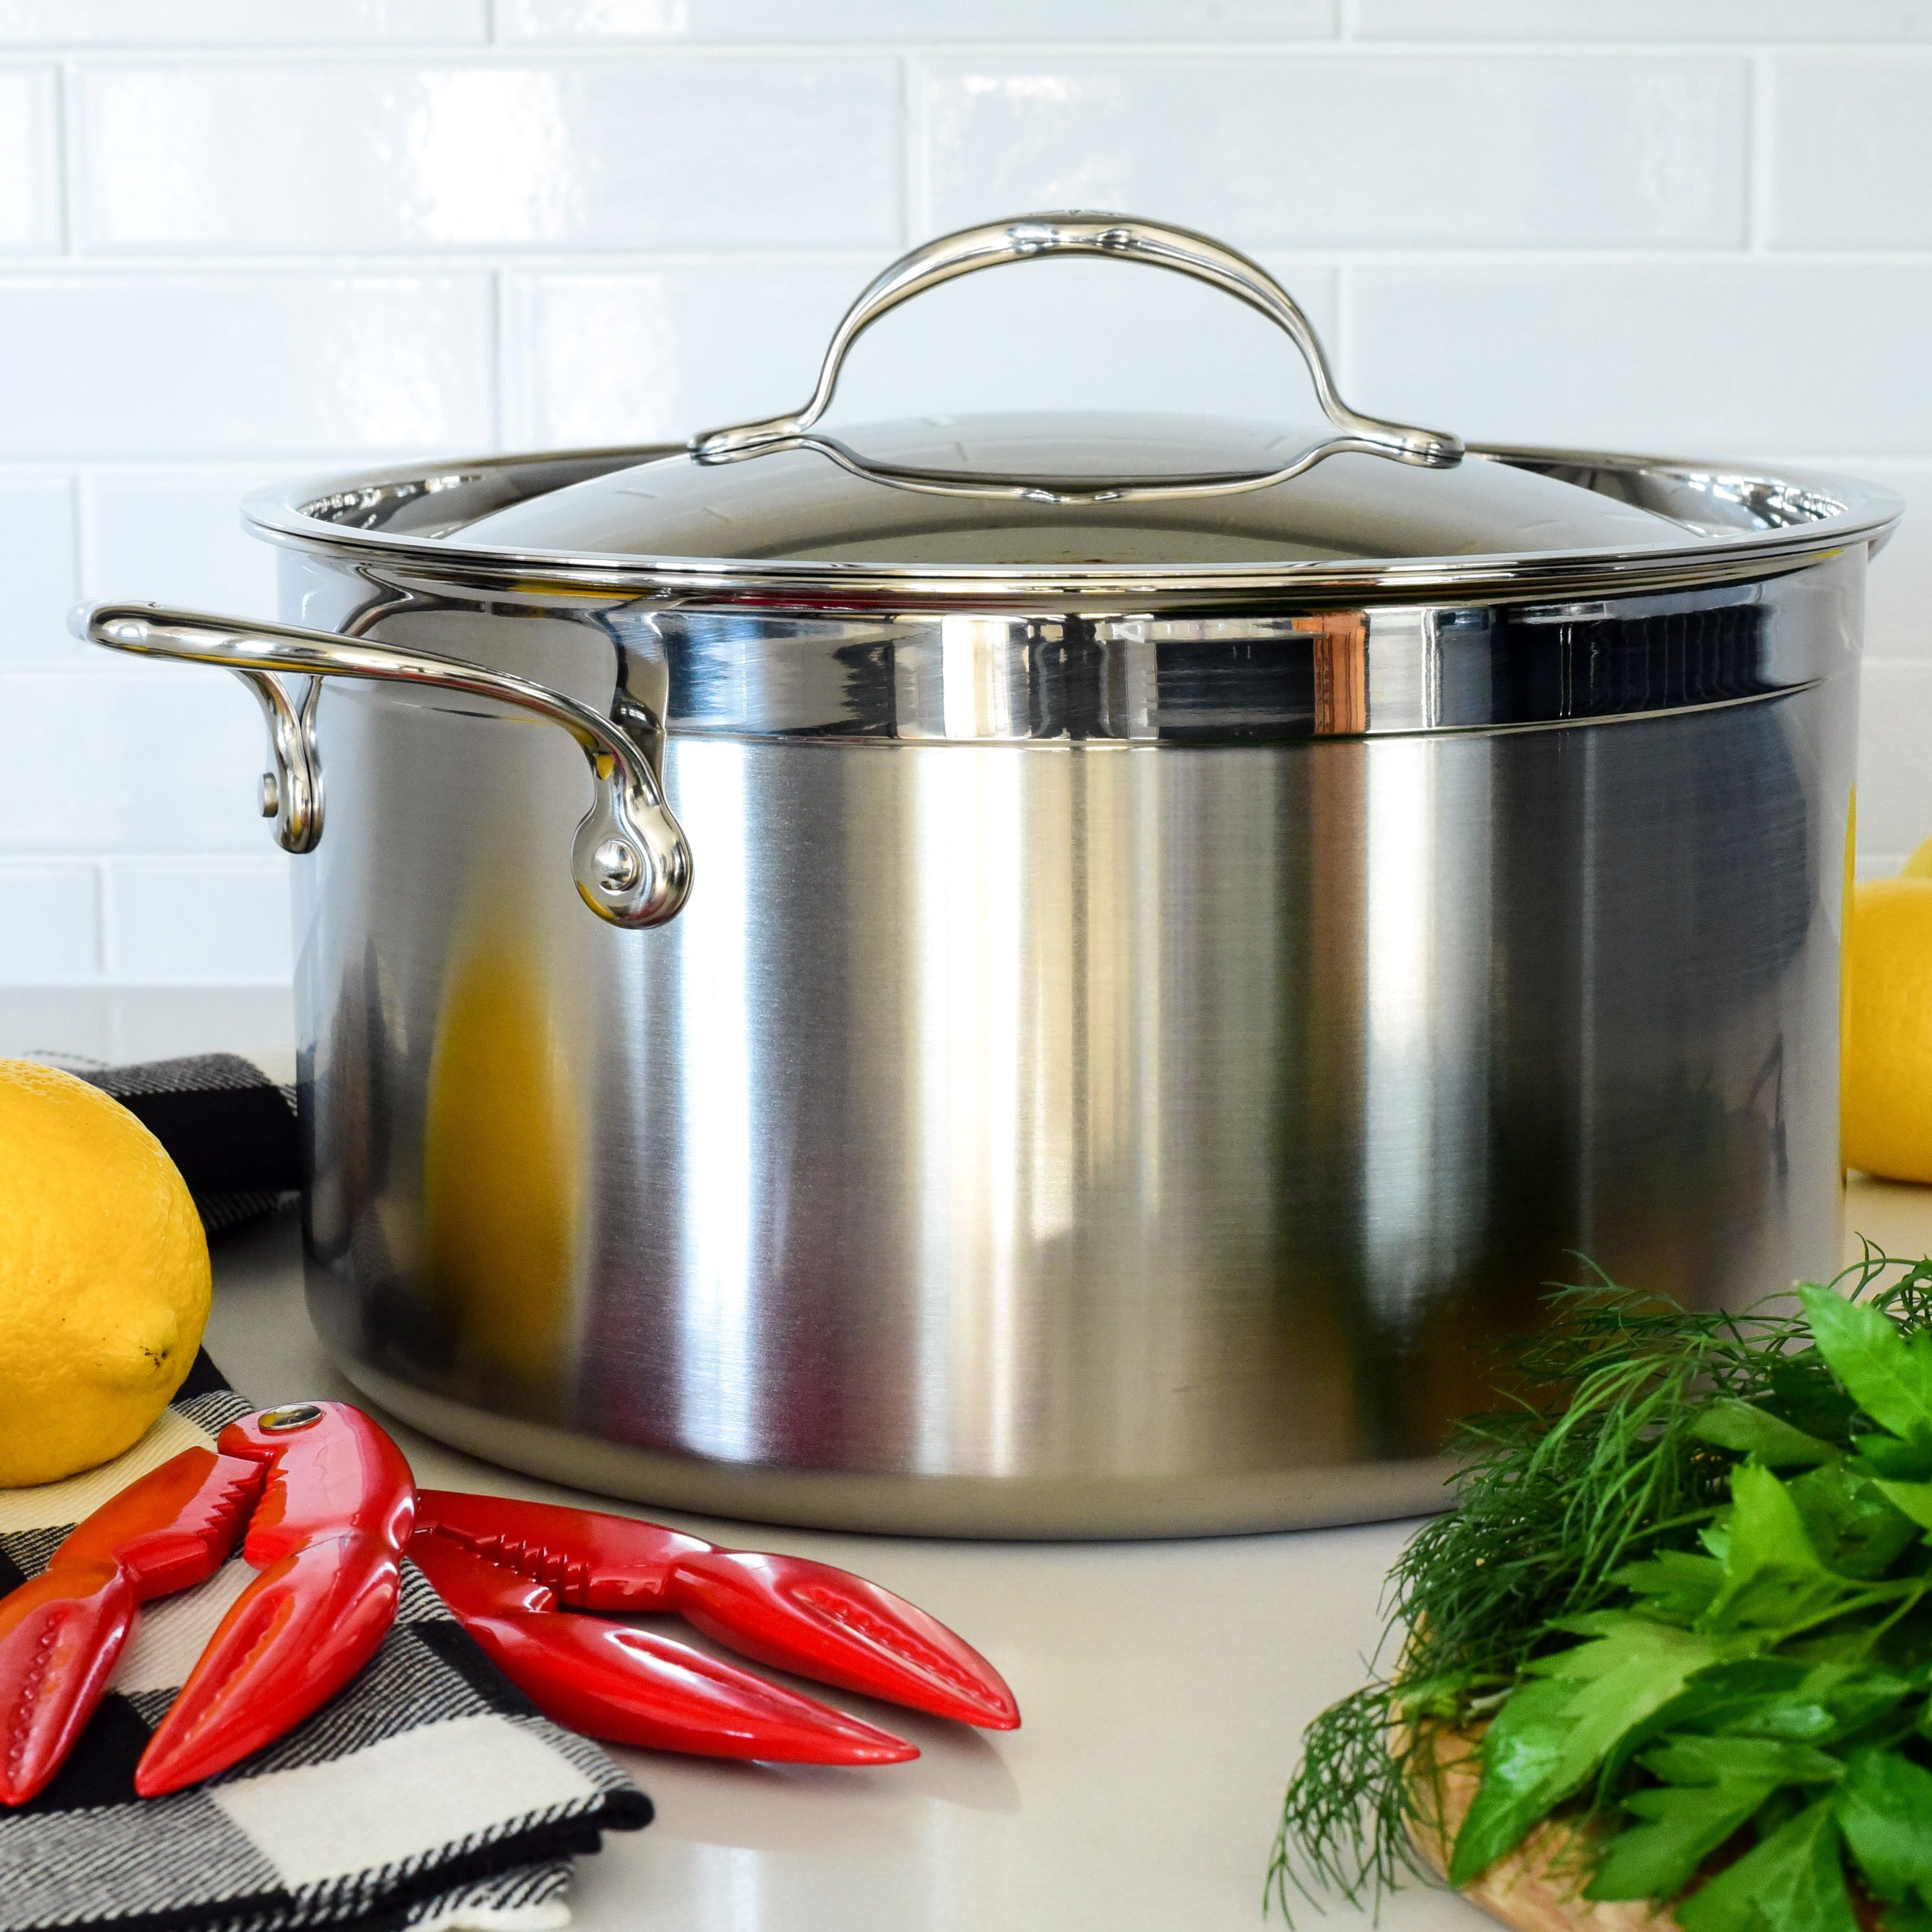 Professional Clad Stainless Steel Stockpot, 8-Quart